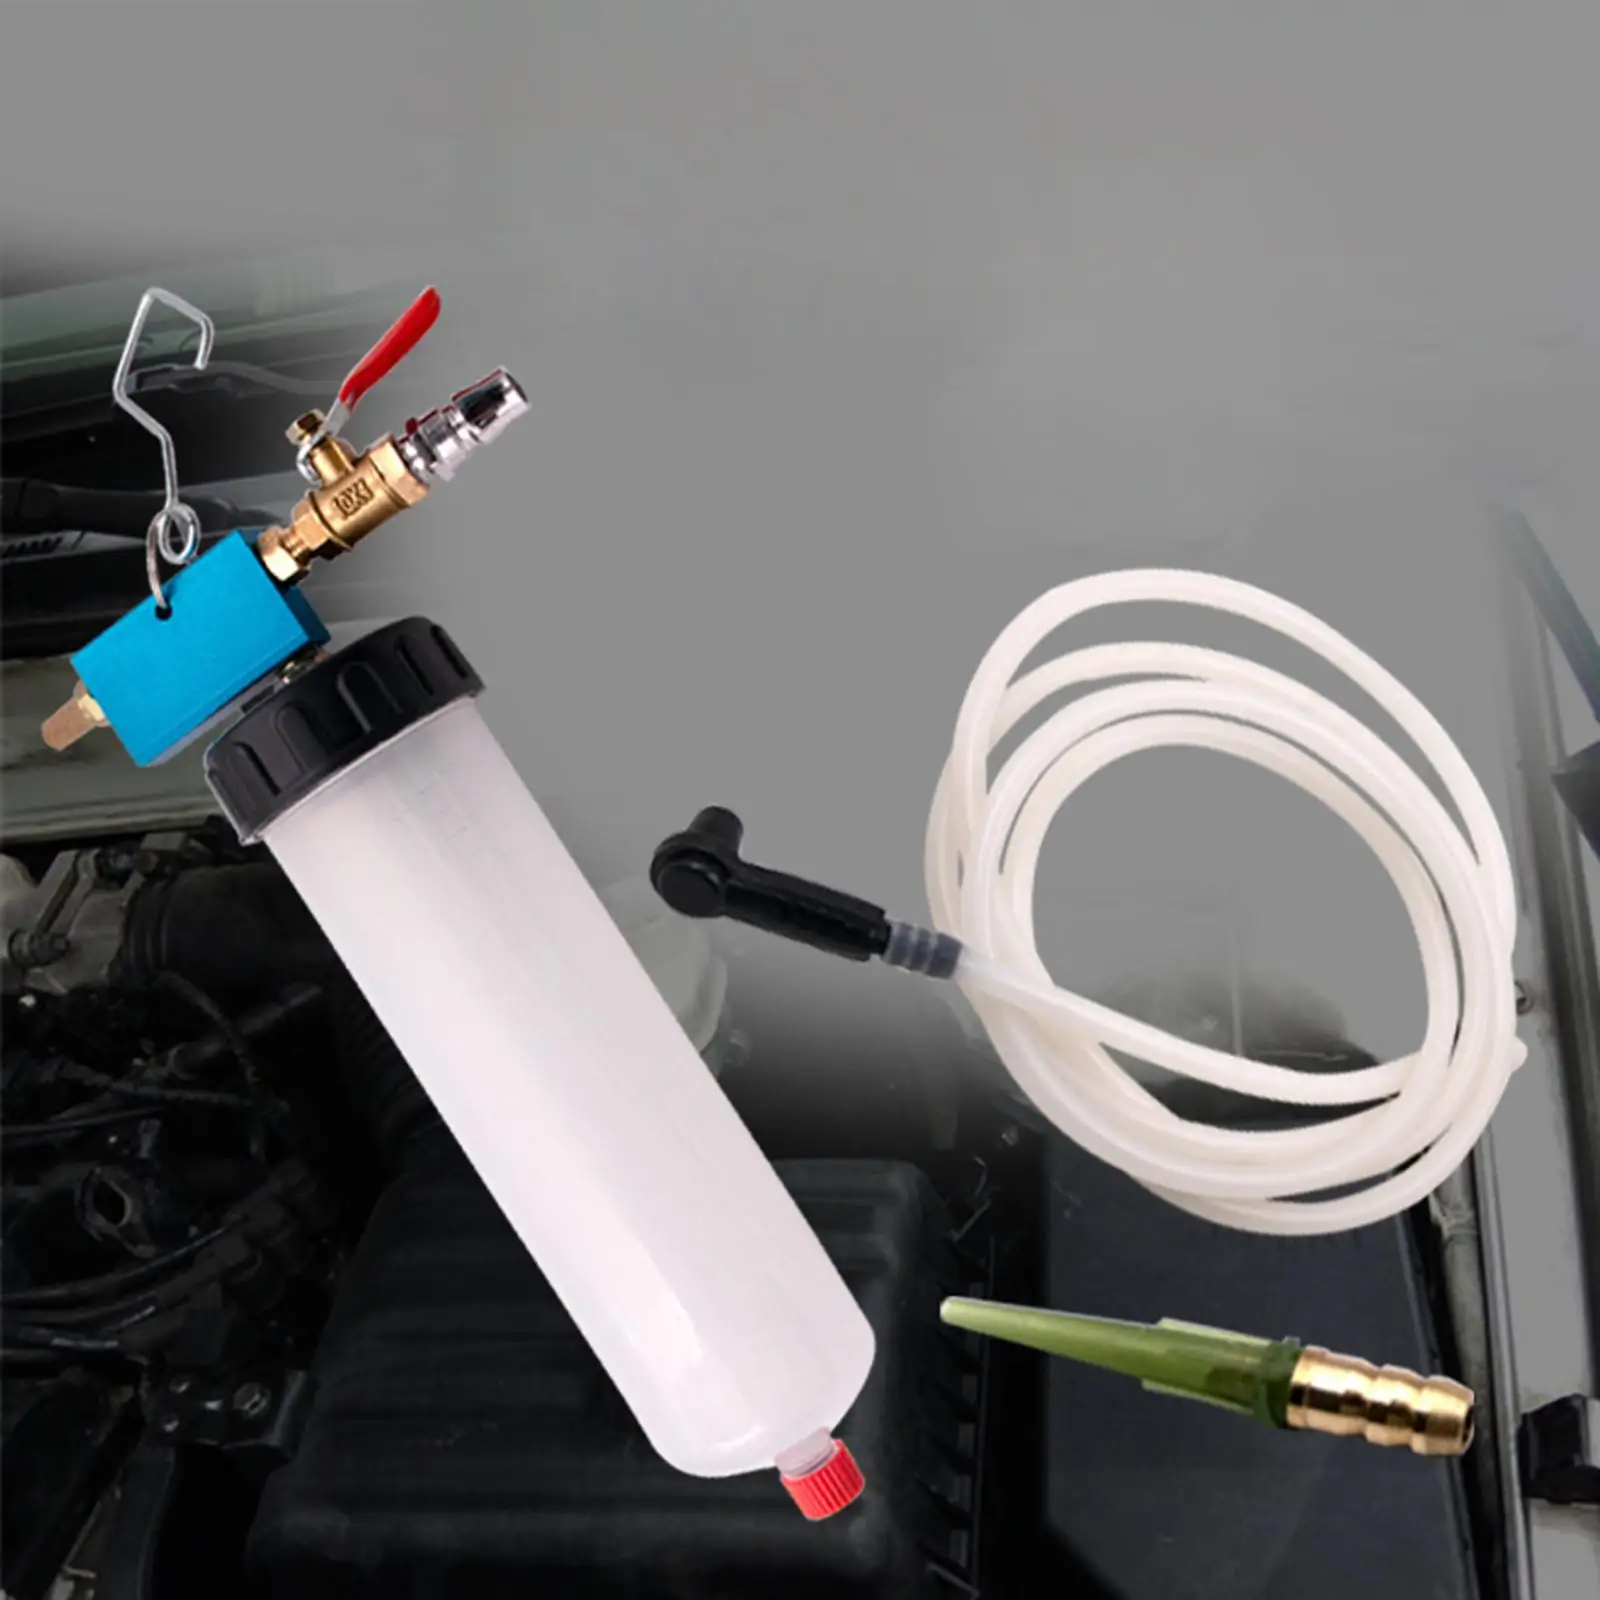 Universal Auto Brake Fluid Extractor Hydraulic Clutch Pump Equipment Kit Oil Change Replacement Tool for Car